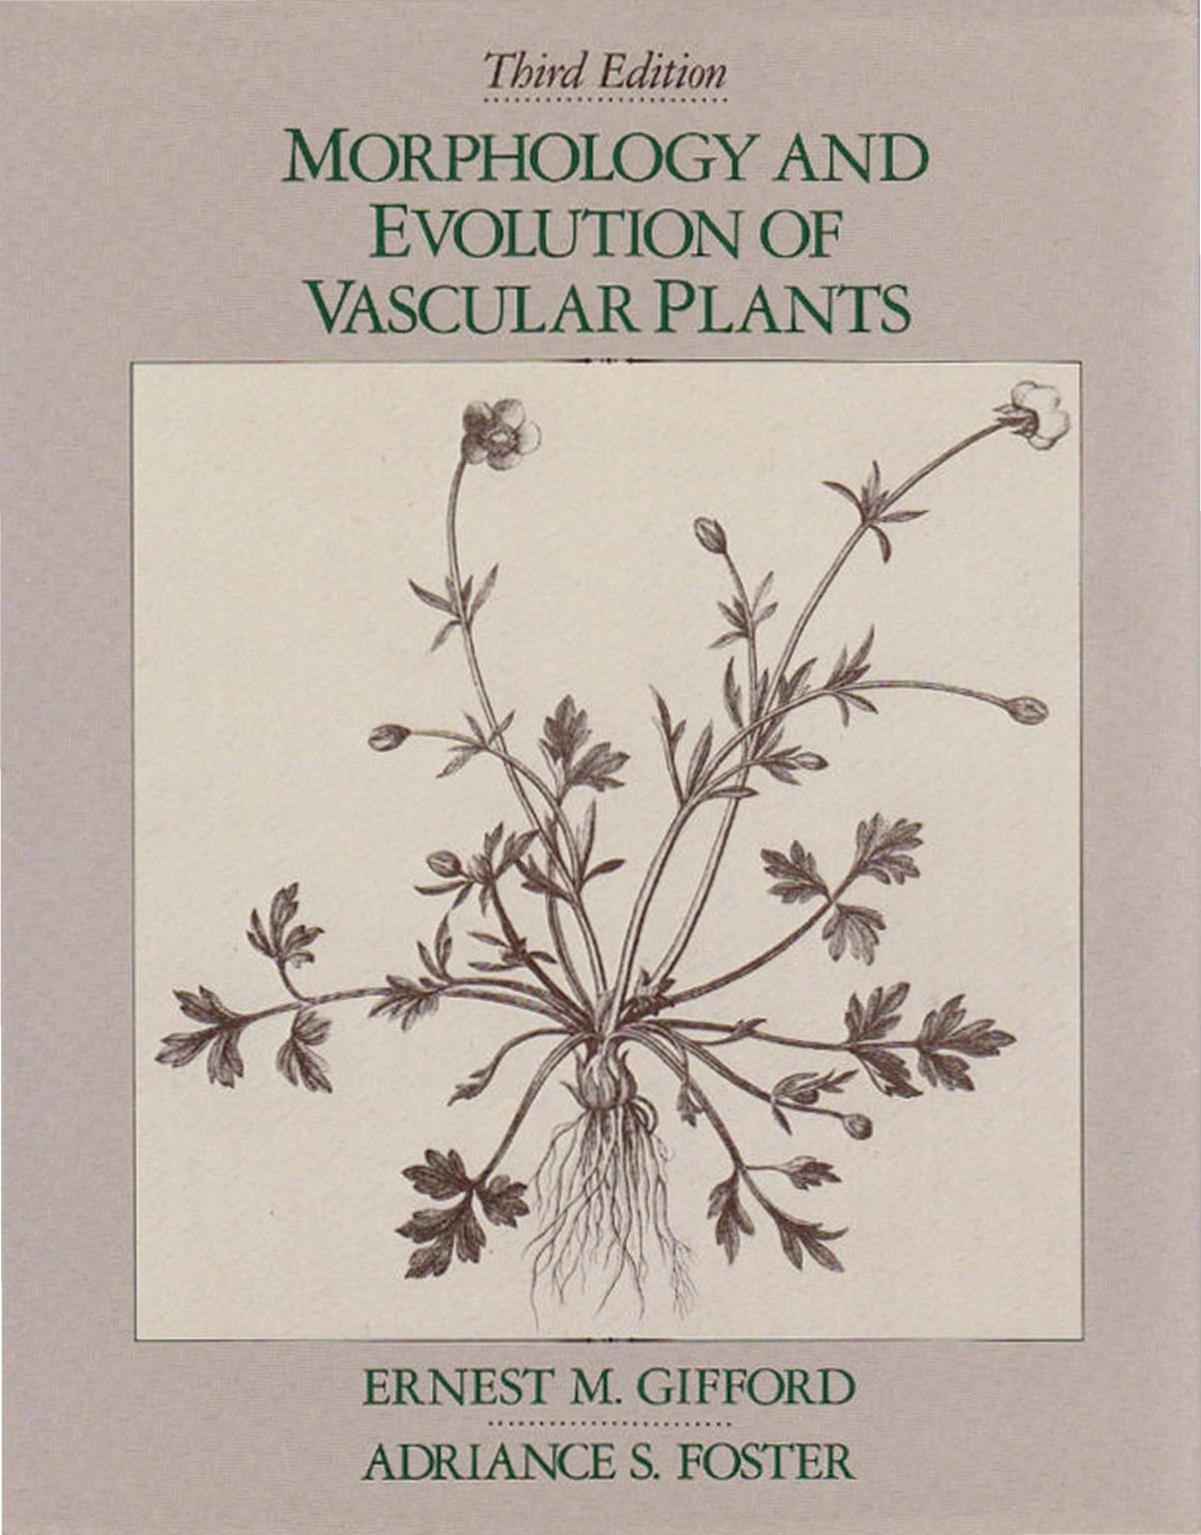 Morphology and Evolution of Vascular Plants, 3rd Edition (Series of Books in Biology)